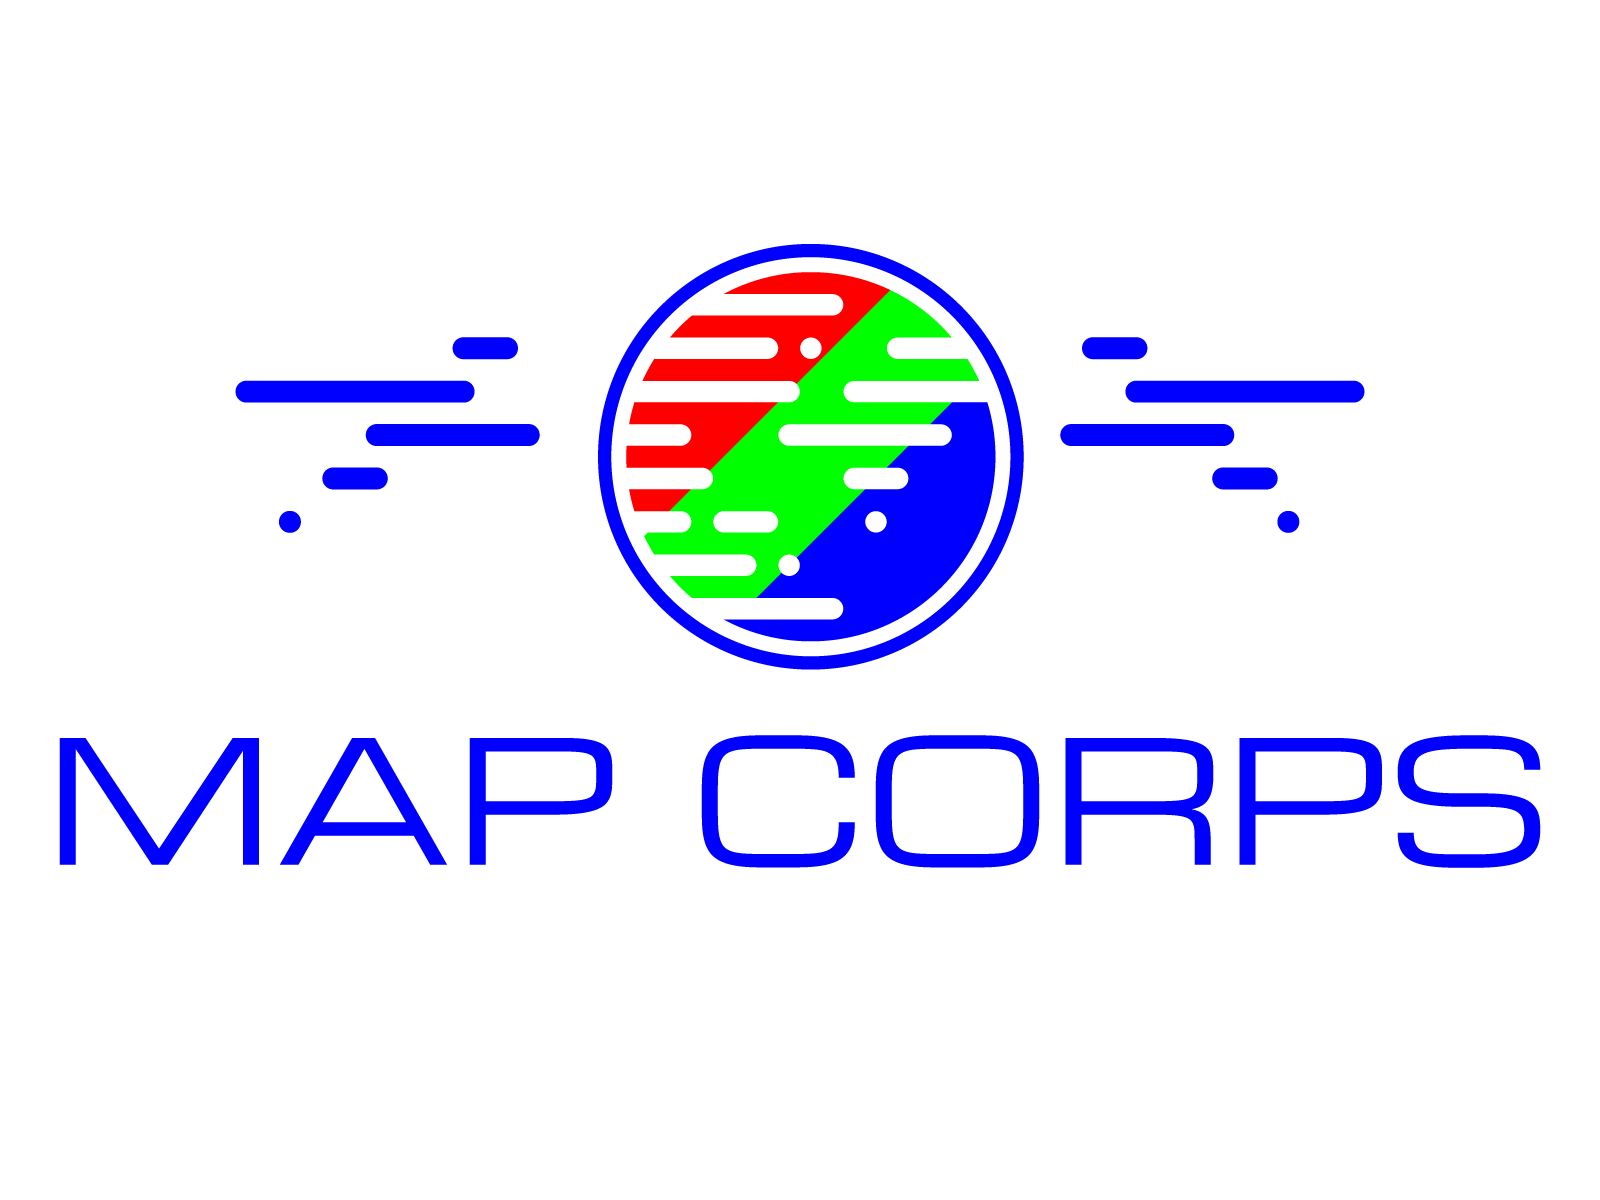 Map Corps